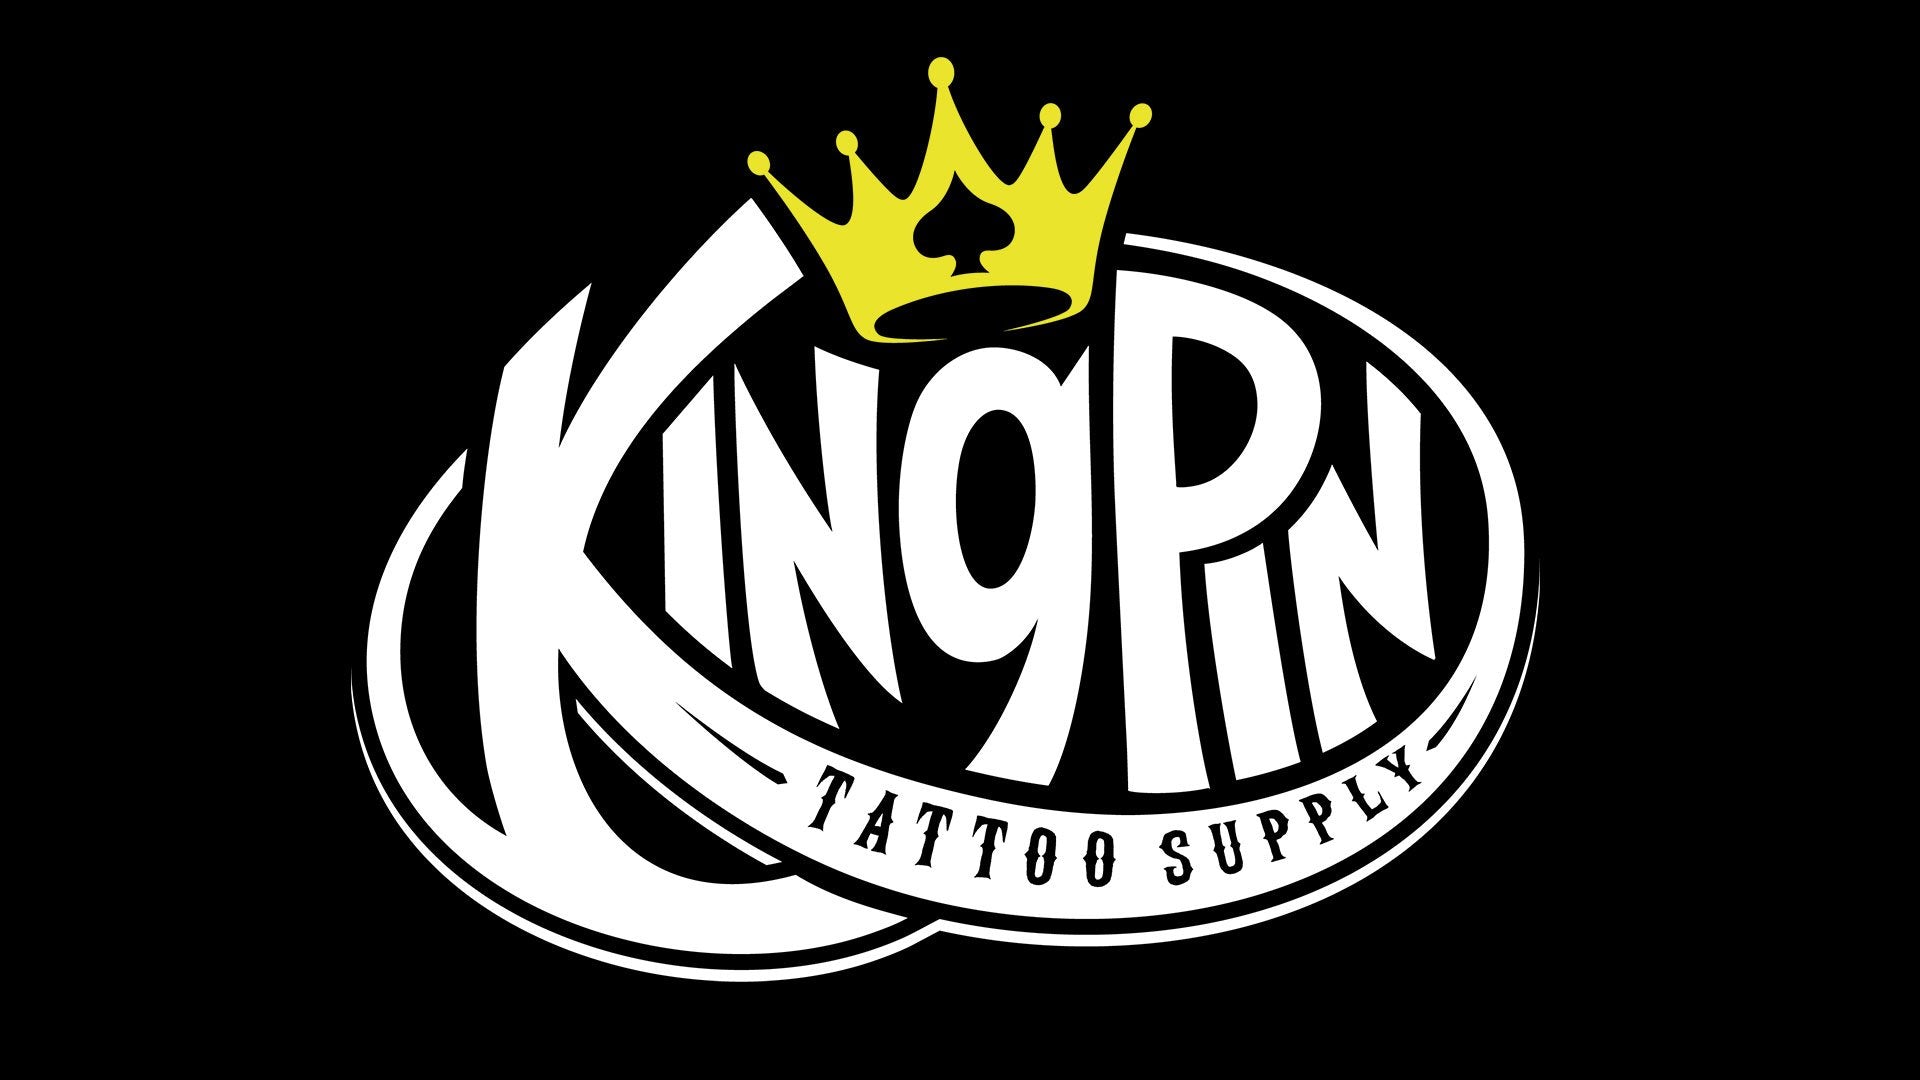 Kingpin Tattoo Supply Inspired by the Artists: Innovation is Top Priority Article Image